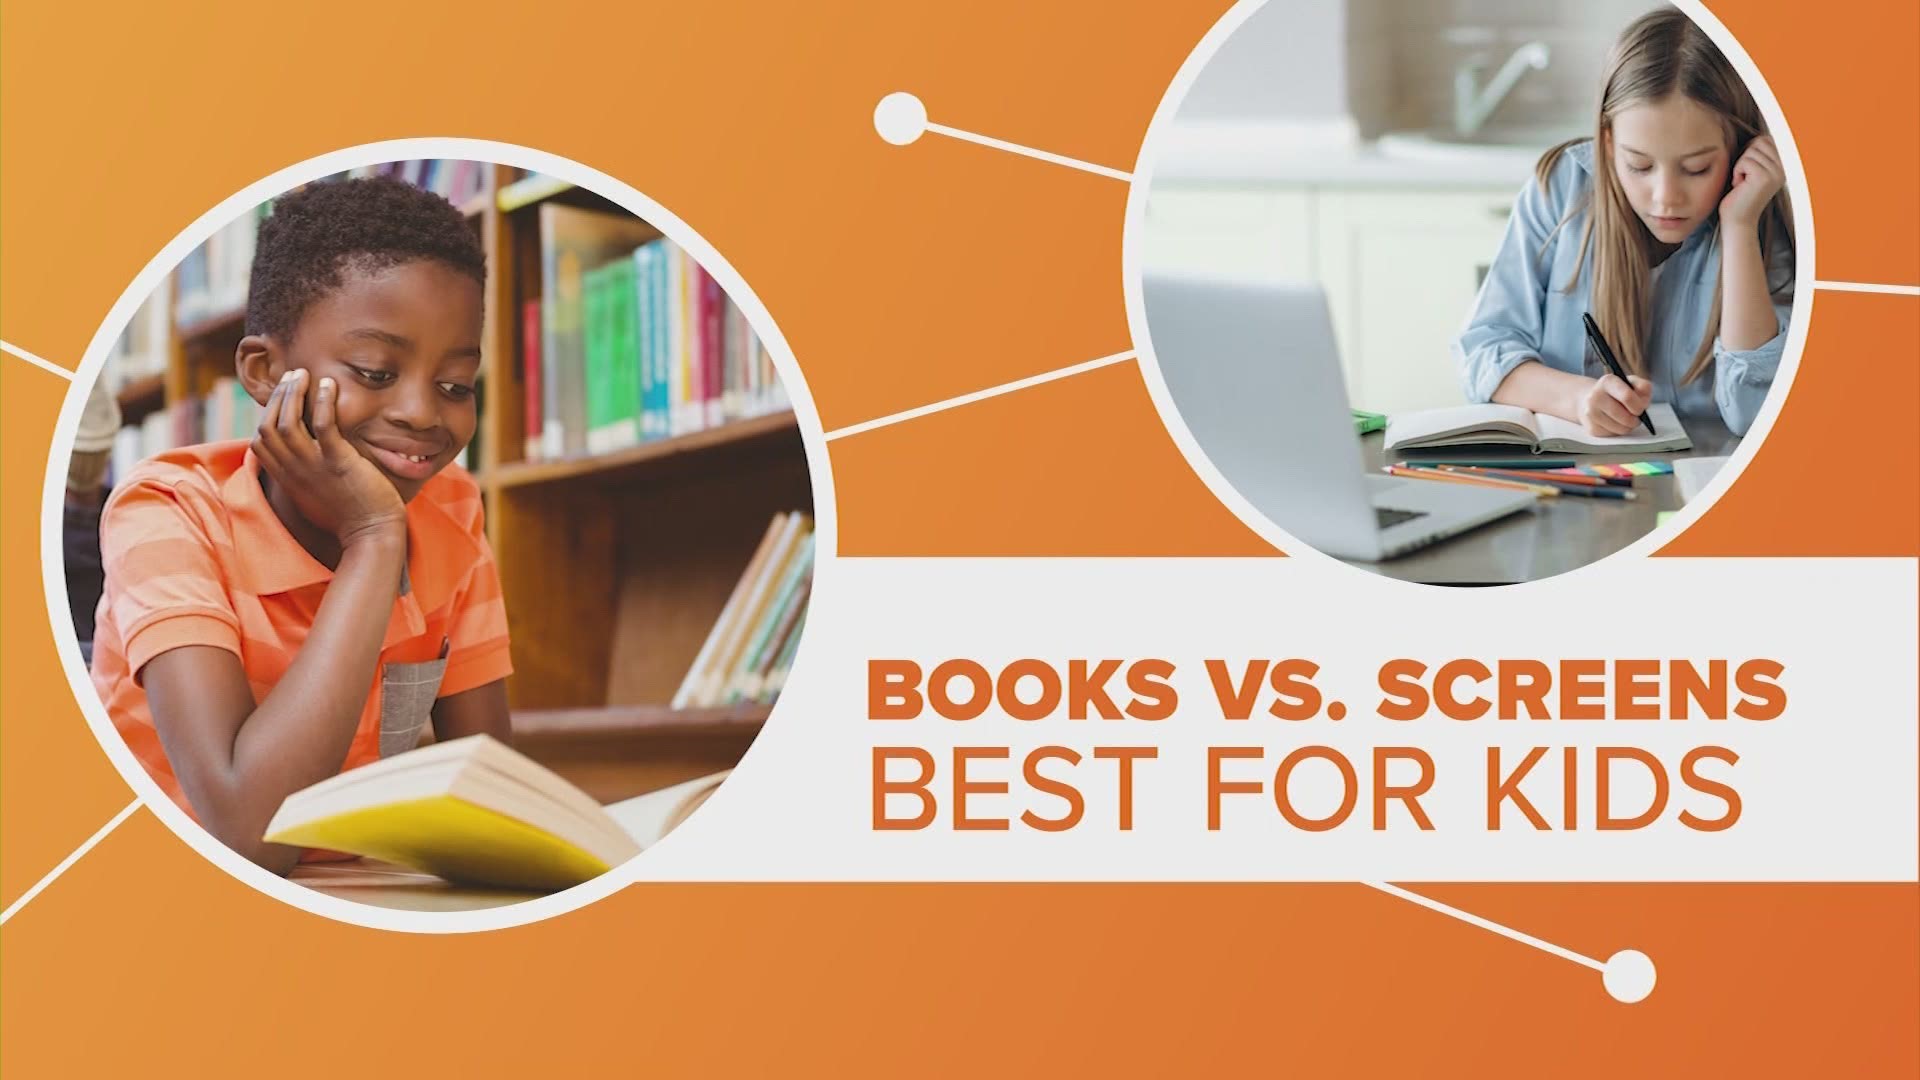 With so many kids in virtual learning, parents may be concerned whether reading on a screen is just as good as reading a real book. Let’s connect the dots.